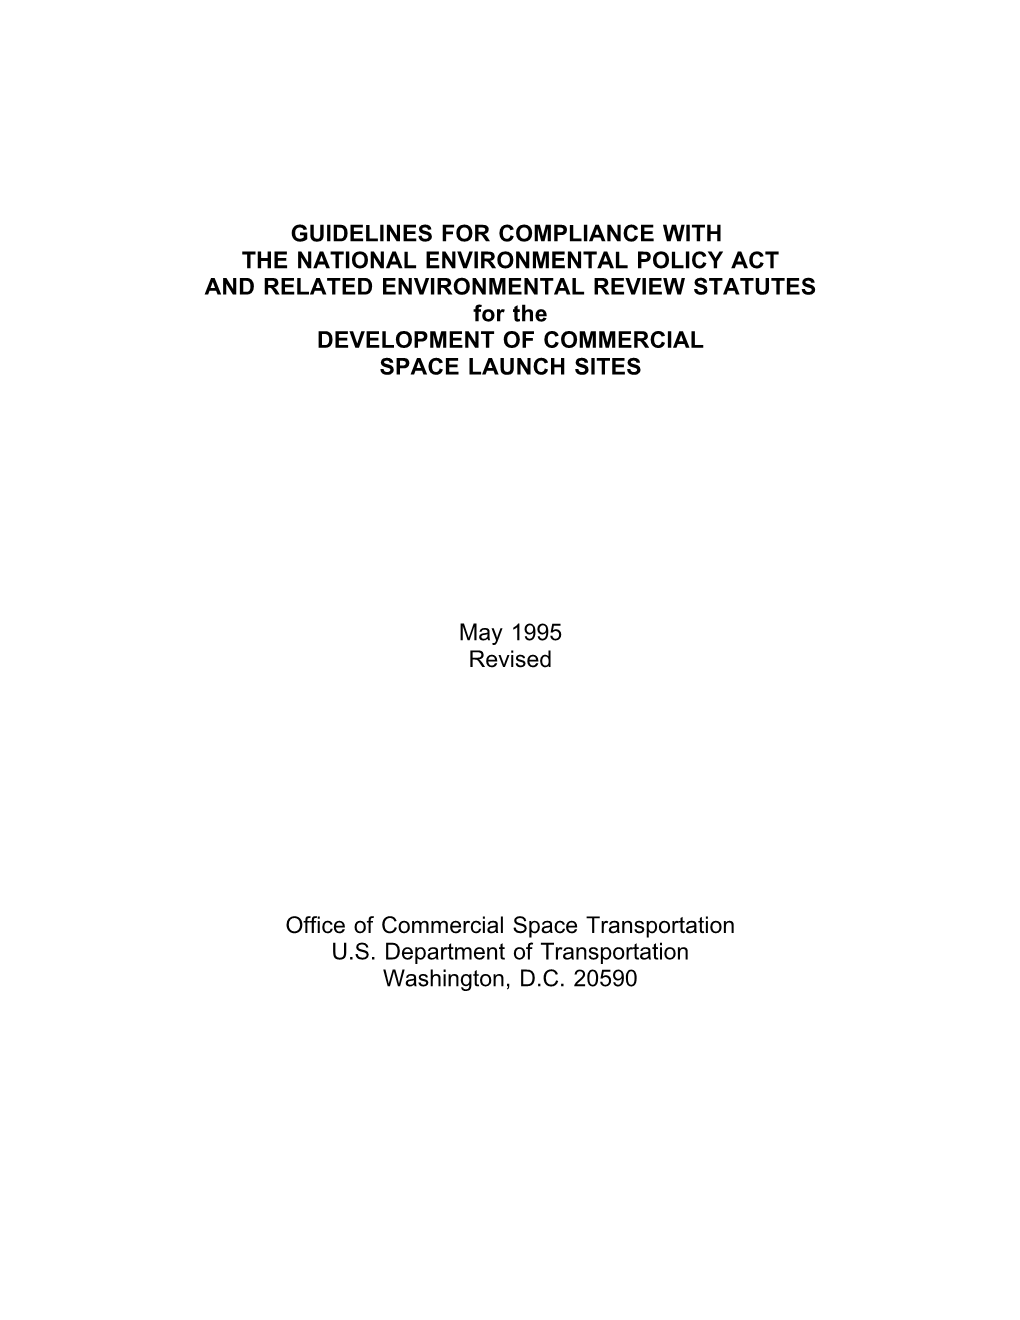 GUIDELINES for COMPLIANCE with the NATIONAL ENVIRONMENTAL POLICY ACT and RELATED ENVIRONMENTAL REVIEW STATUTES for the DEVELOPMENT of COMMERCIAL SPACE LAUNCH SITES